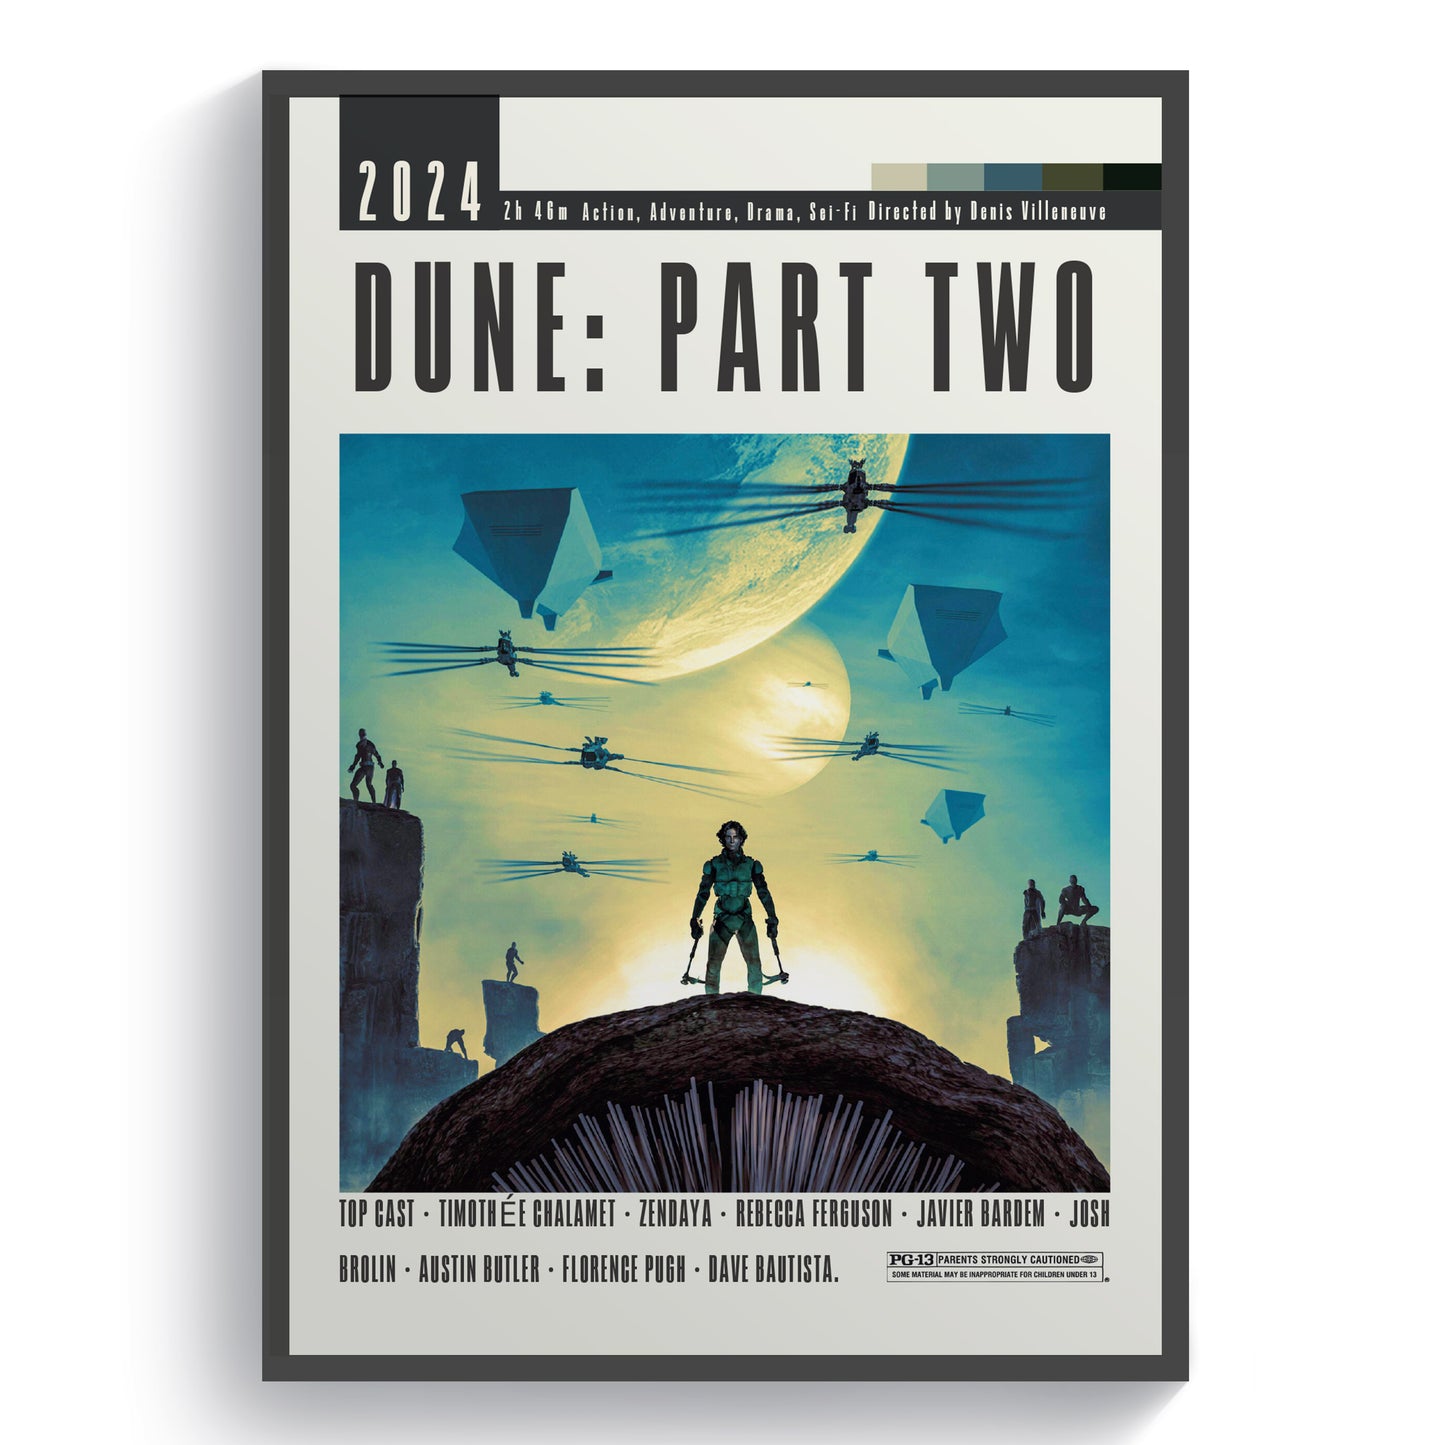 Discover the stunning world of DUNE with our PART 2 movie posters. Featuring intricate designs and captivating visuals, these posters are a must-have for any fan. Showcase your love for the franchise and bring the epic story to life with these high-quality prints. Own a piece of the DUNE universe today!